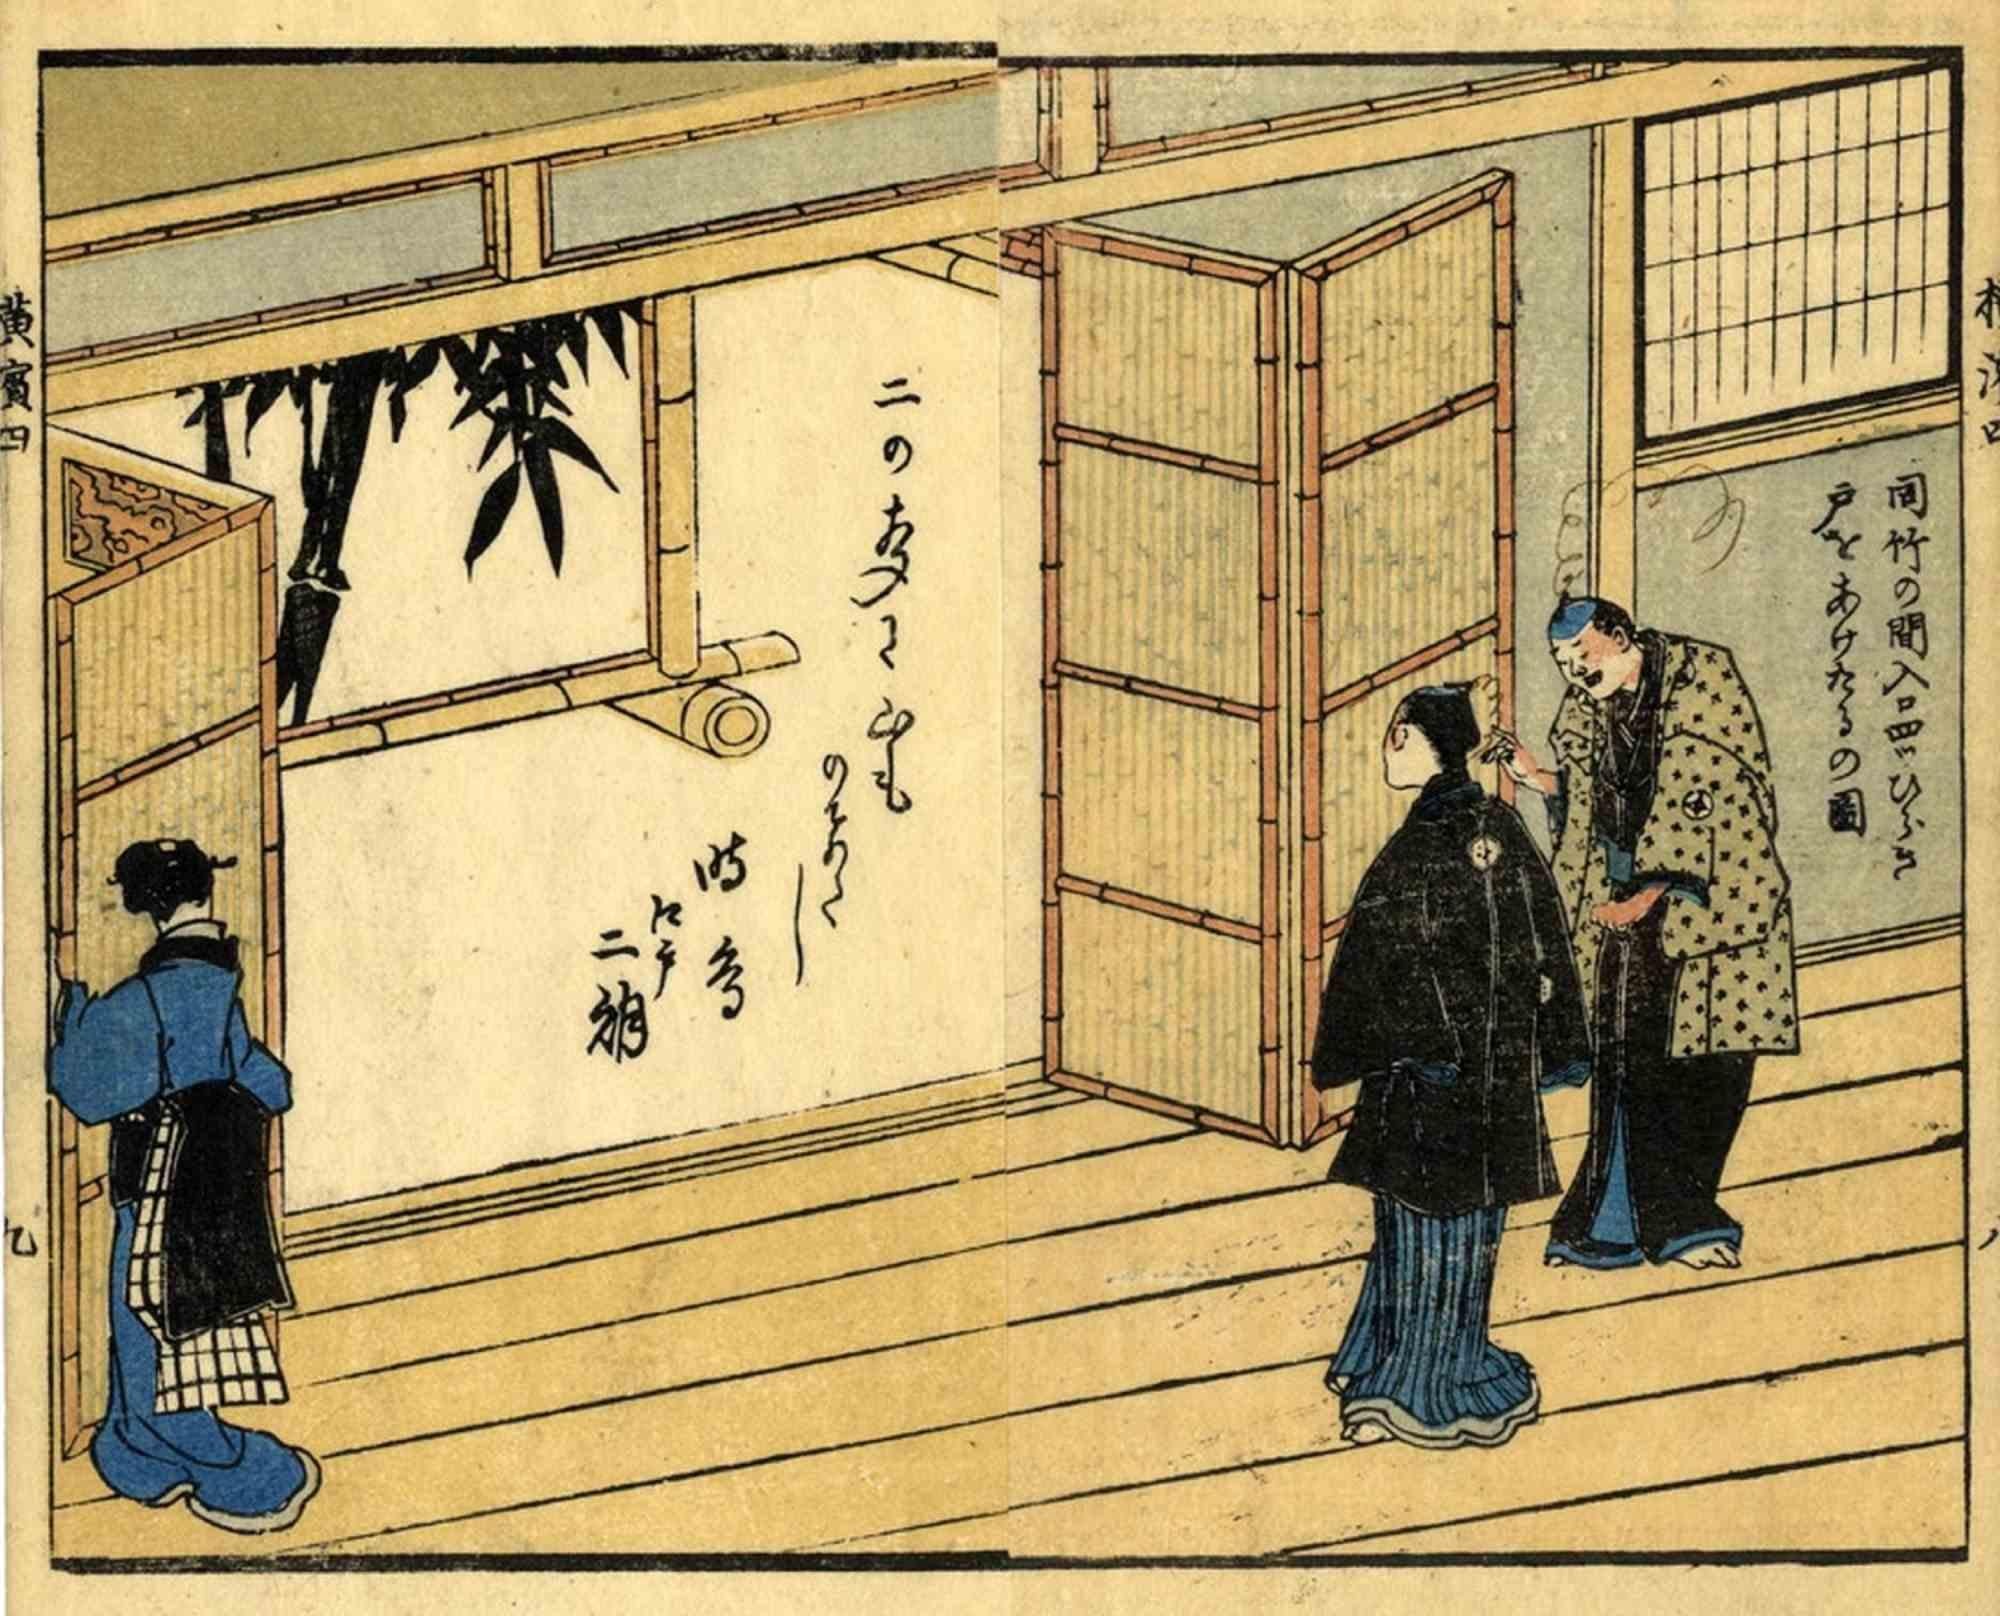 Bamboo Rooms in Iwahisa is an original modern artwork realized by Utagawa Hiroshige II (1826 – 1869) in the 1840s.

Very good impression with reduced palette mainly in blue, green and yellow. Slightly yellowed, glued at upper corners.

Passepartout.